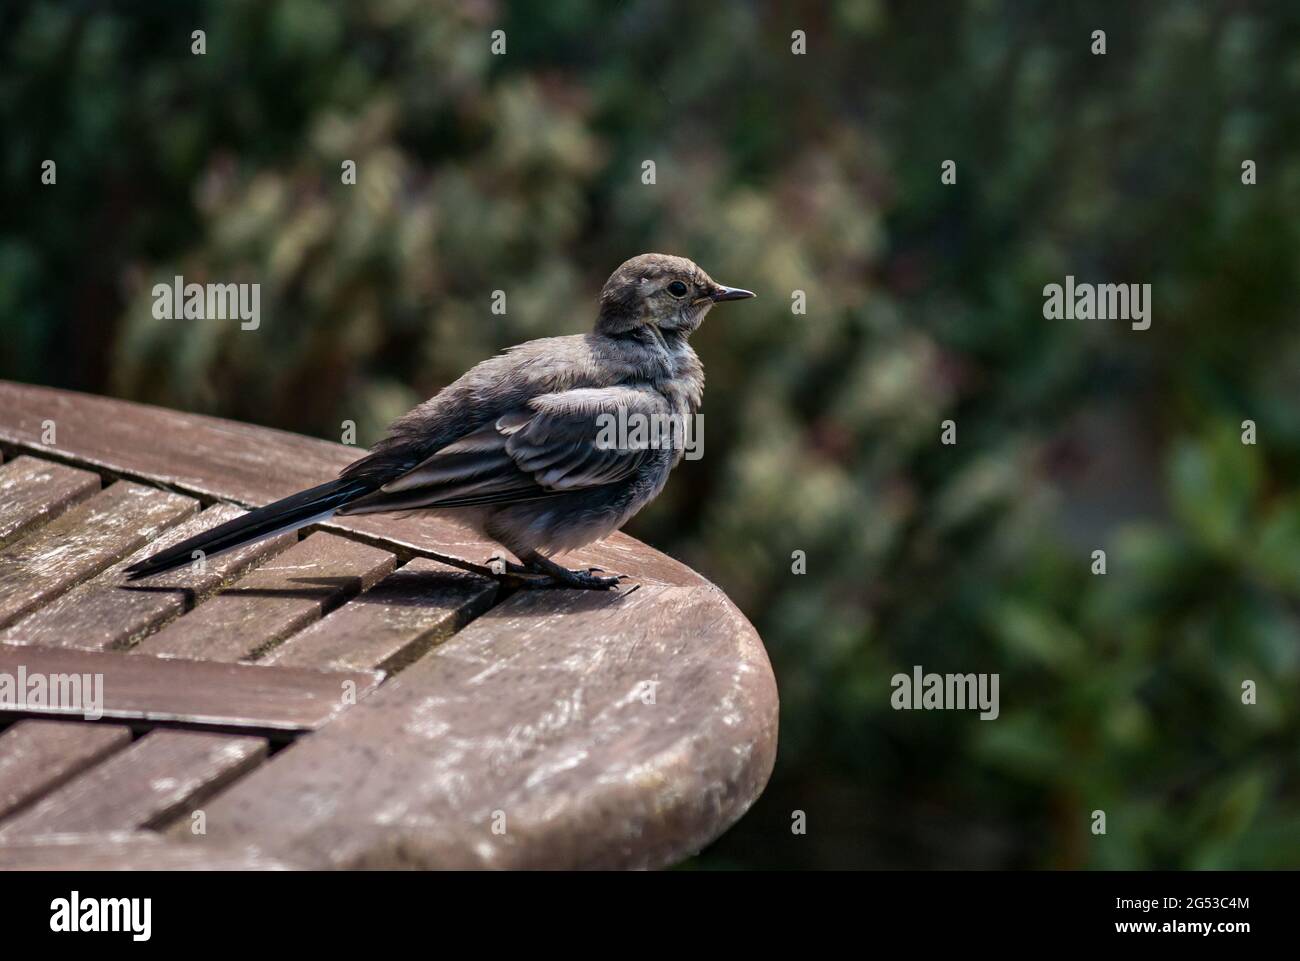 Fledgling juvenile pied or white wagtail (Motacilla alba) perched on patio table in sunshine, Scotland, UK Stock Photo